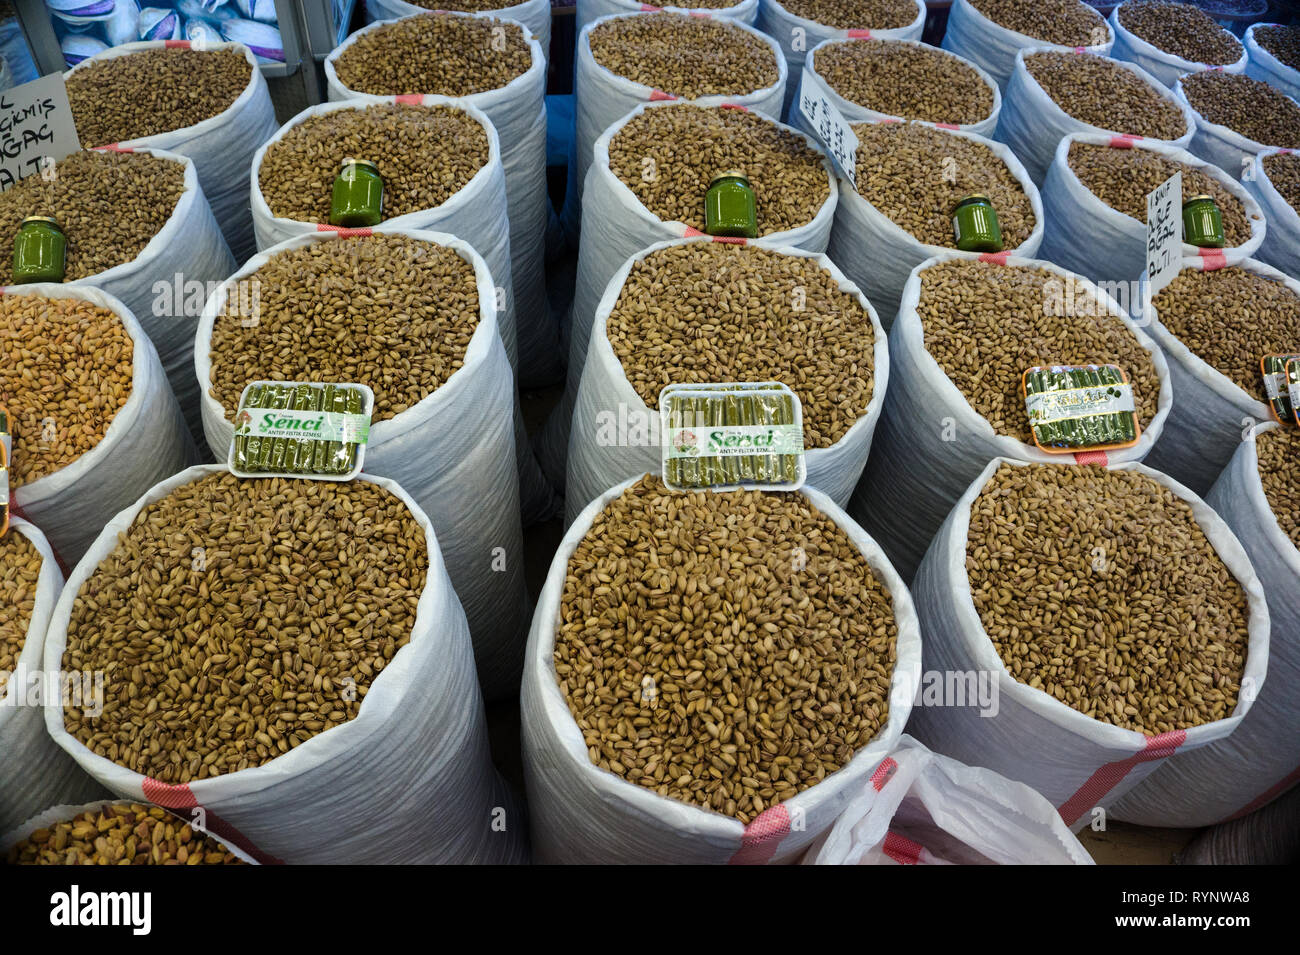 Pistachio is most famous agricultural product of Gaziantep and widely sold all around the city, Turkey. Stock Photo